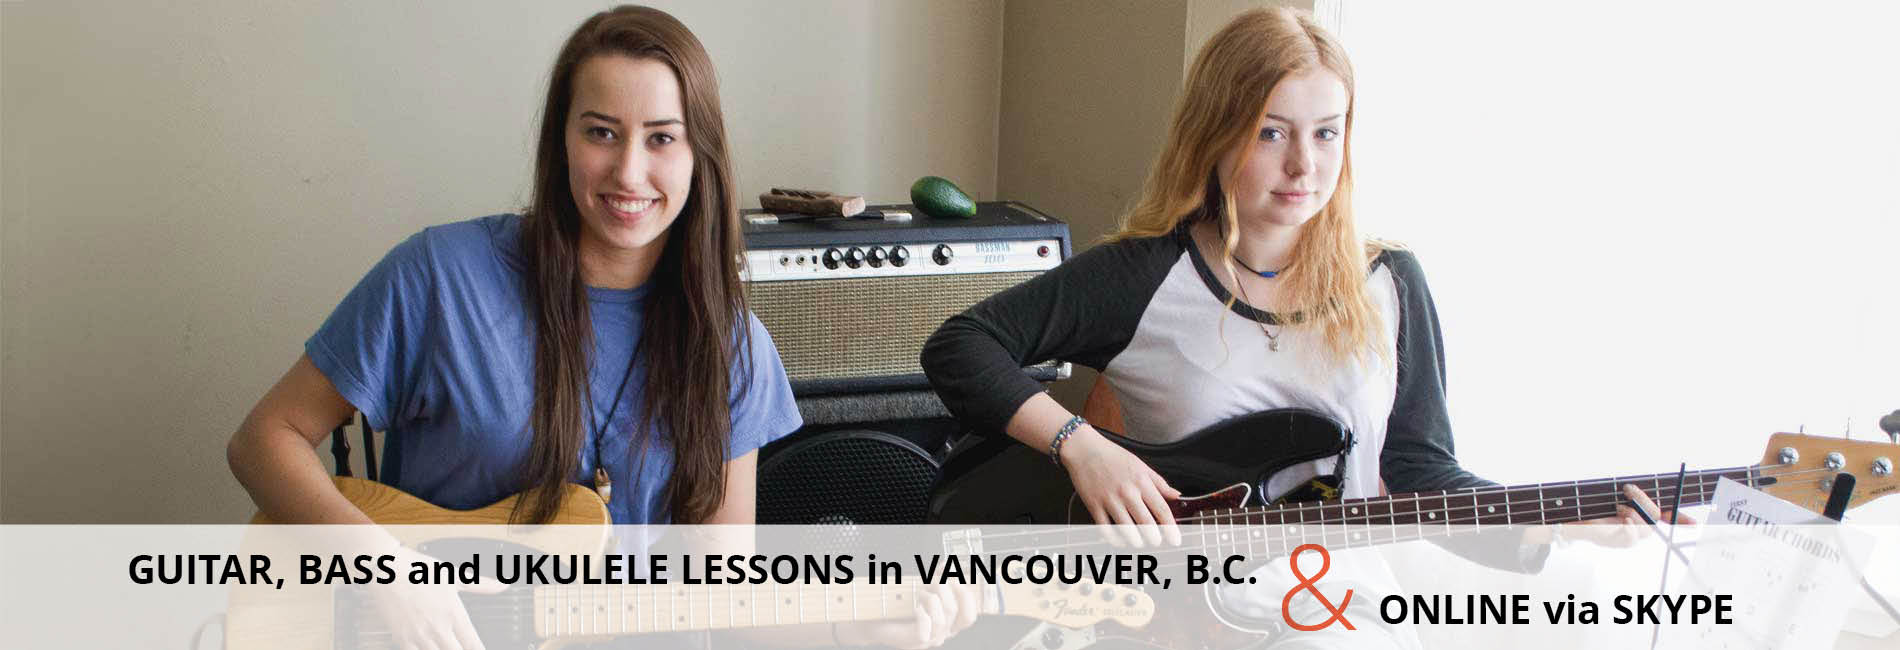 Guitar, Bass and Ukulele Lessons in Vancouver